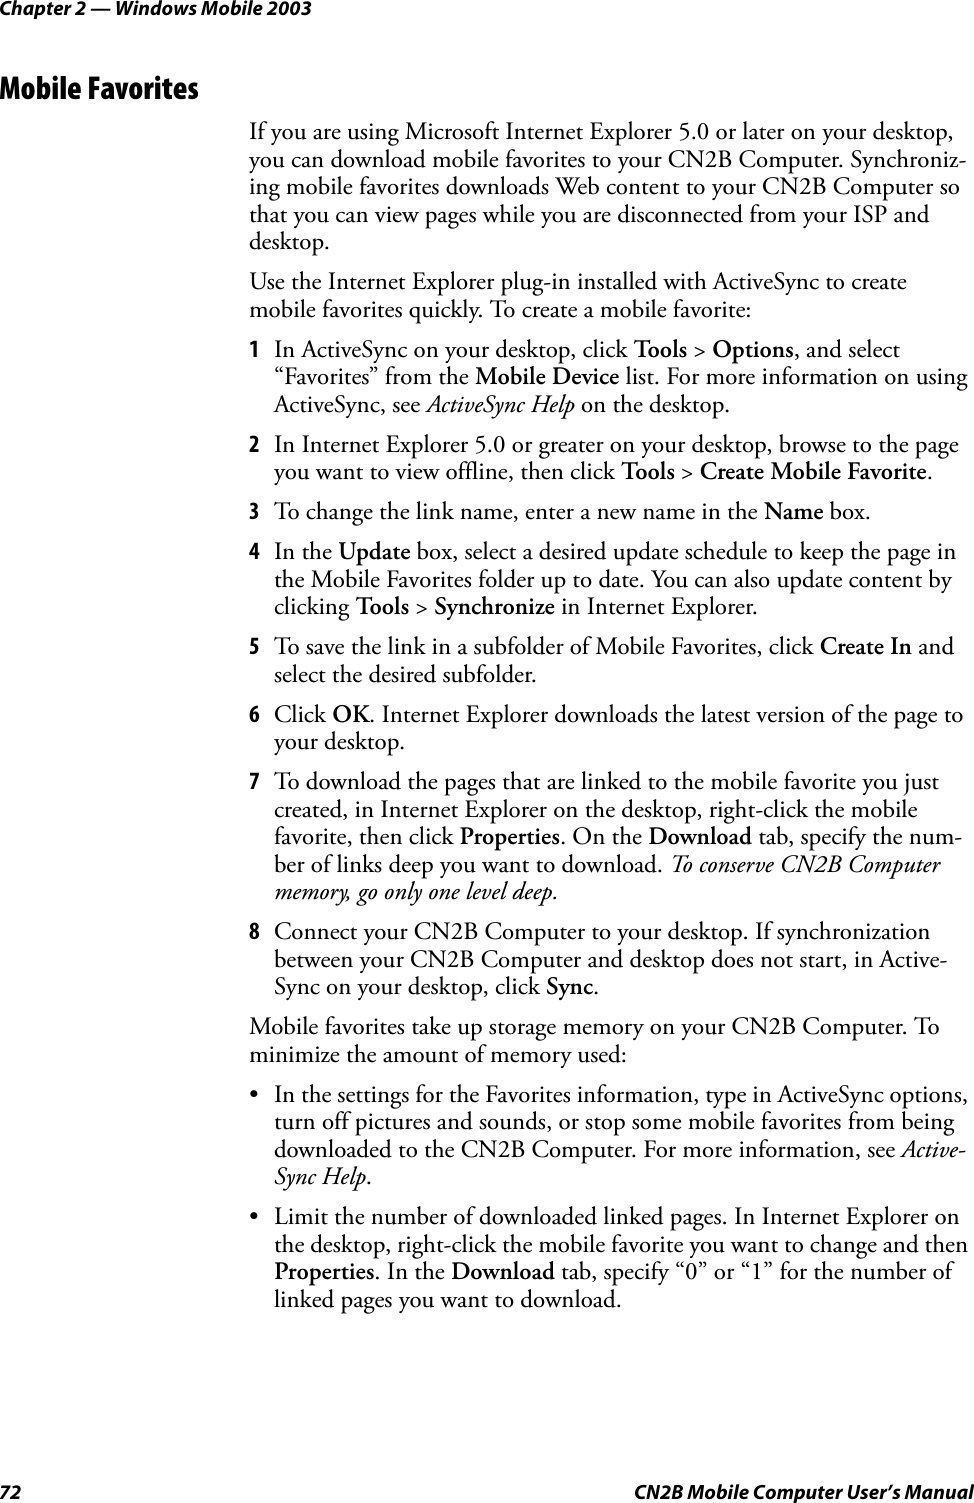 Chapter 2 — Windows Mobile 200372 CN2B Mobile Computer User’s ManualMobile FavoritesIf you are using Microsoft Internet Explorer 5.0 or later on your desktop, you can download mobile favorites to your CN2B Computer. Synchroniz-ing mobile favorites downloads Web content to your CN2B Computer so that you can view pages while you are disconnected from your ISP and desktop.Use the Internet Explorer plug-in installed with ActiveSync to create mobile favorites quickly. To create a mobile favorite:1In ActiveSync on your desktop, click To o l s  &gt; Options, and select “Favorites” from the Mobile Device list. For more information on using ActiveSync, see ActiveSync Help on the desktop.2In Internet Explorer 5.0 or greater on your desktop, browse to the page you want to view offline, then click Too l s &gt; Create Mobile Favorite.3To change the link name, enter a new name in the Name box.4In the Update box, select a desired update schedule to keep the page in the Mobile Favorites folder up to date. You can also update content by clicking Tools &gt; Synchronize in Internet Explorer.5To save the link in a subfolder of Mobile Favorites, click Create In and select the desired subfolder.6Click OK. Internet Explorer downloads the latest version of the page to your desktop.7To download the pages that are linked to the mobile favorite you just created, in Internet Explorer on the desktop, right-click the mobile favorite, then click Properties. On the Download tab, specify the num-ber of links deep you want to download. To conserve CN2B Computer memory, go only one level deep.8Connect your CN2B Computer to your desktop. If synchronization between your CN2B Computer and desktop does not start, in Active-Sync on your desktop, click Sync. Mobile favorites take up storage memory on your CN2B Computer. To minimize the amount of memory used:• In the settings for the Favorites information, type in ActiveSync options, turn off pictures and sounds, or stop some mobile favorites from being downloaded to the CN2B Computer. For more information, see Active-Sync Help.• Limit the number of downloaded linked pages. In Internet Explorer on the desktop, right-click the mobile favorite you want to change and then Properties. In the Download tab, specify “0” or “1” for the number of linked pages you want to download.